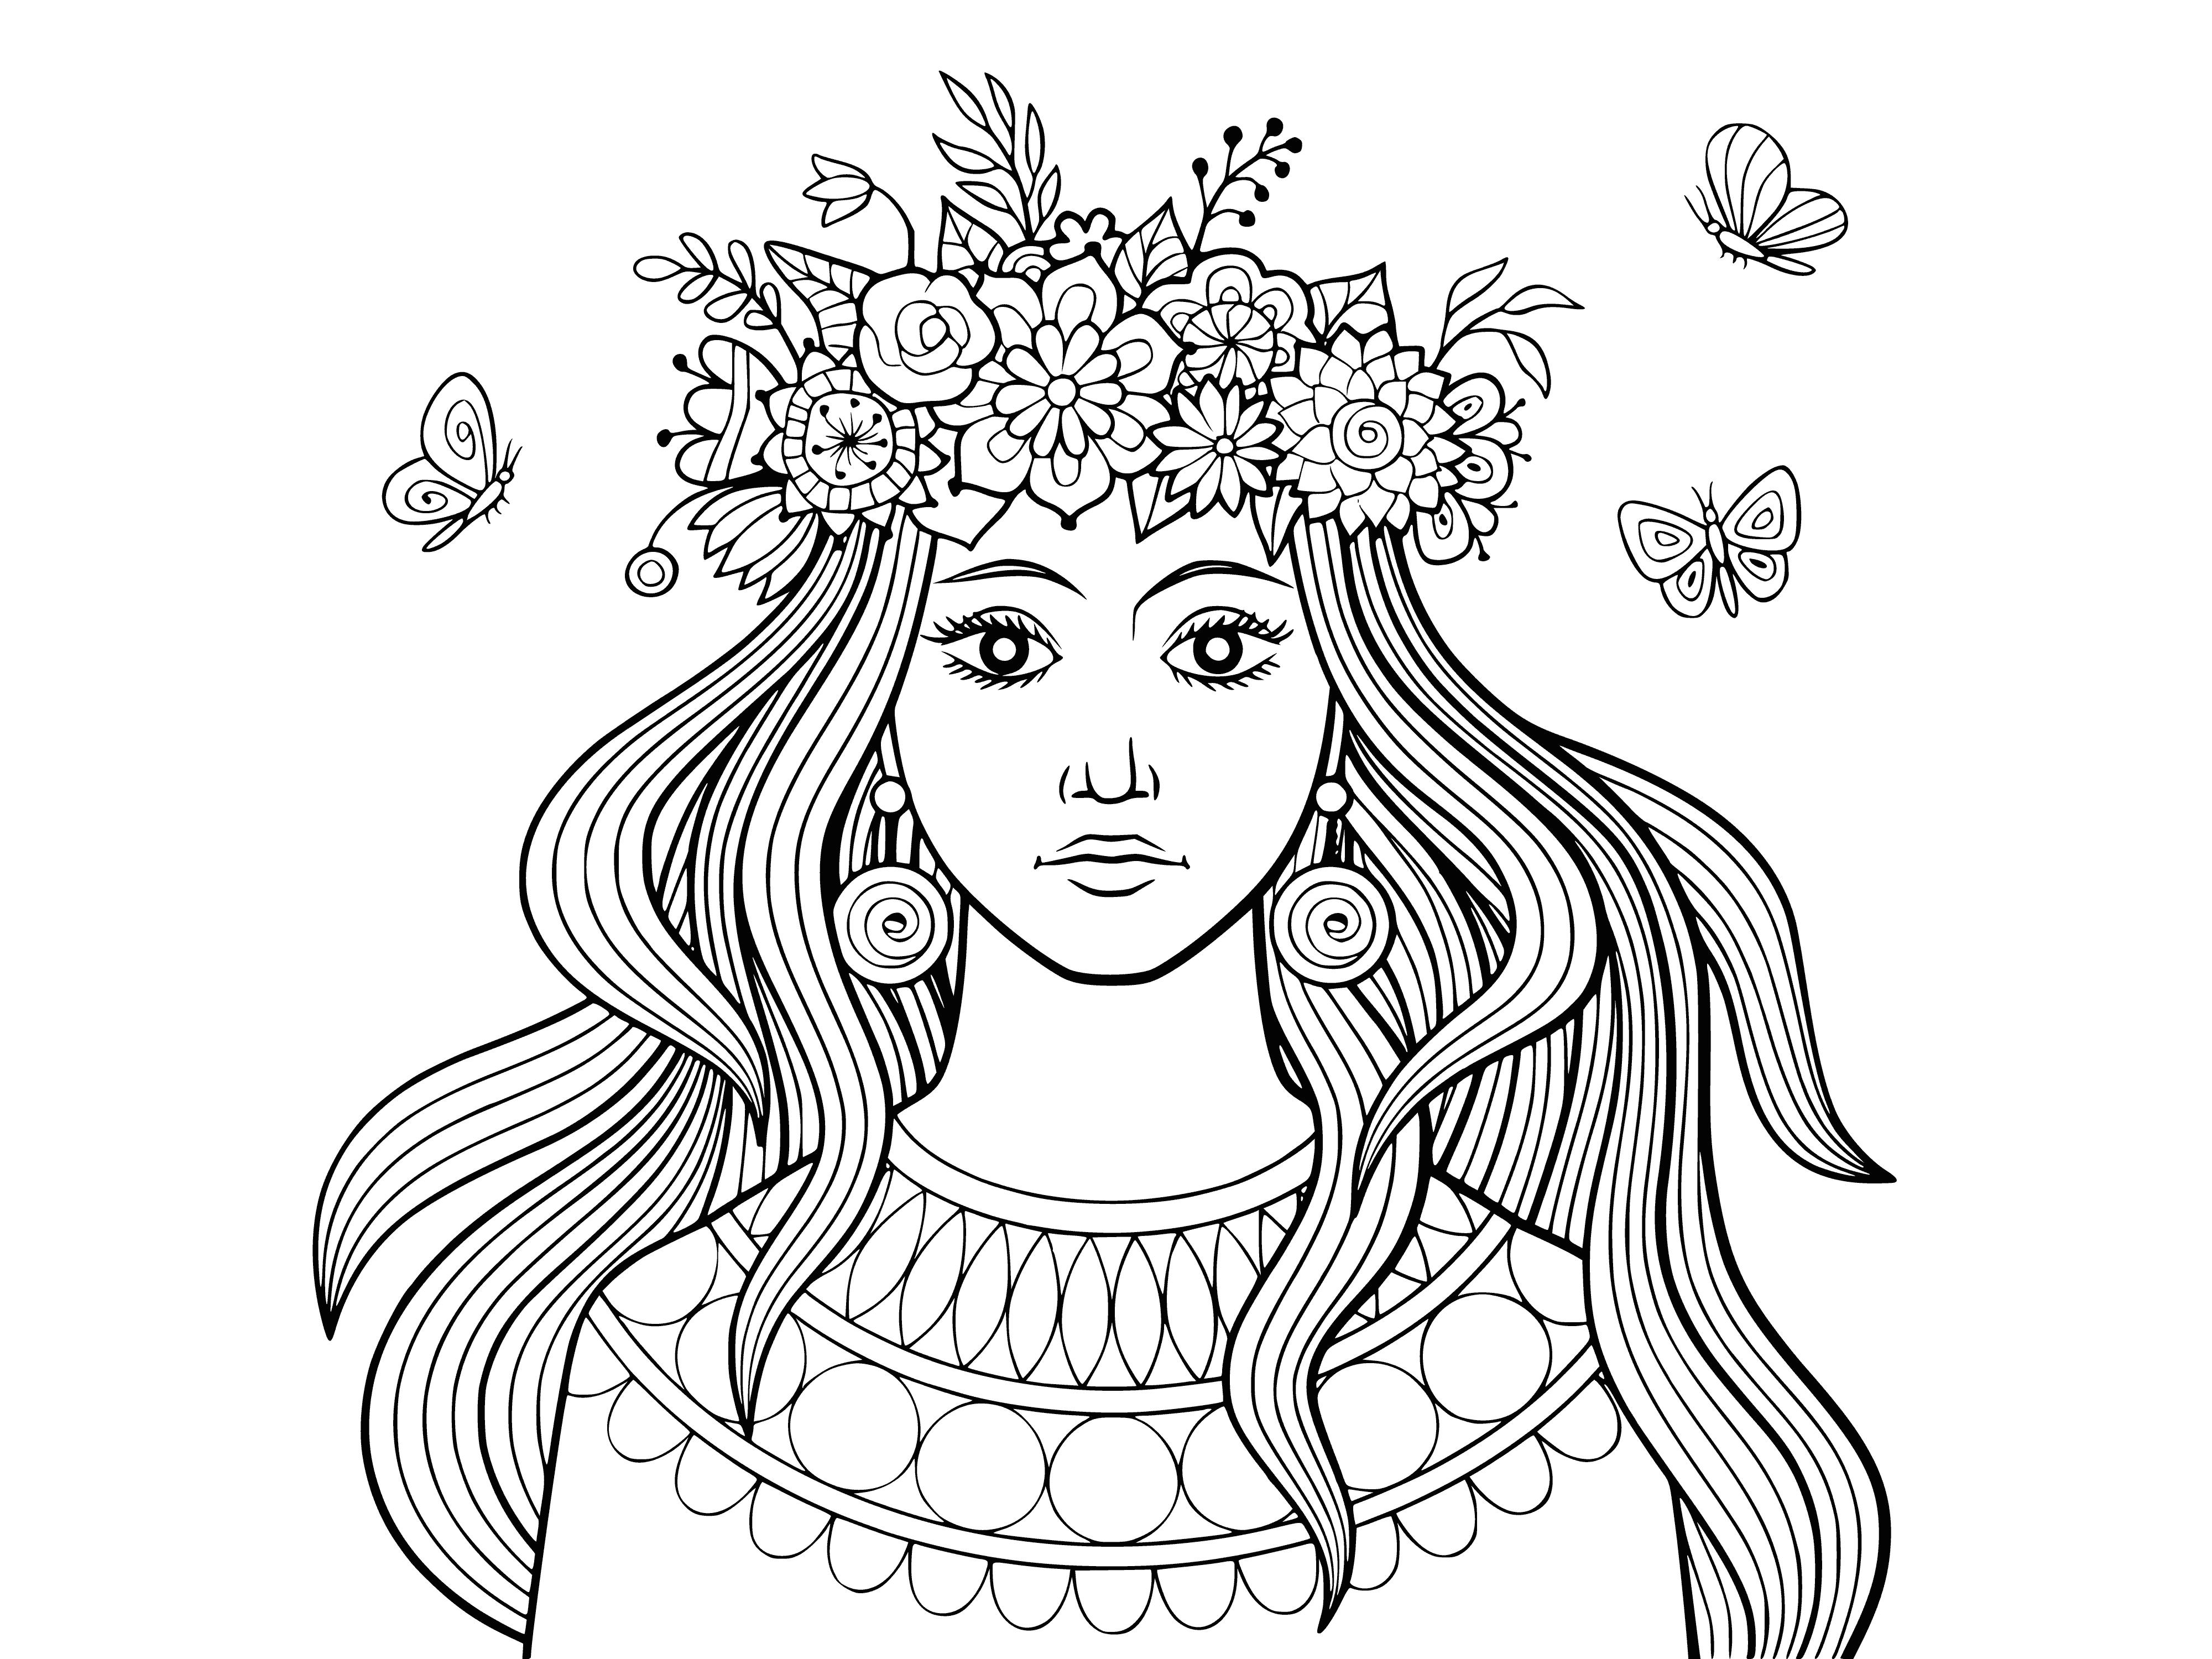 coloring page: Adult coloring page of graceful girl surrounded with flowers & ribbon. Perfect for anyone wanting to de-stress and relax.